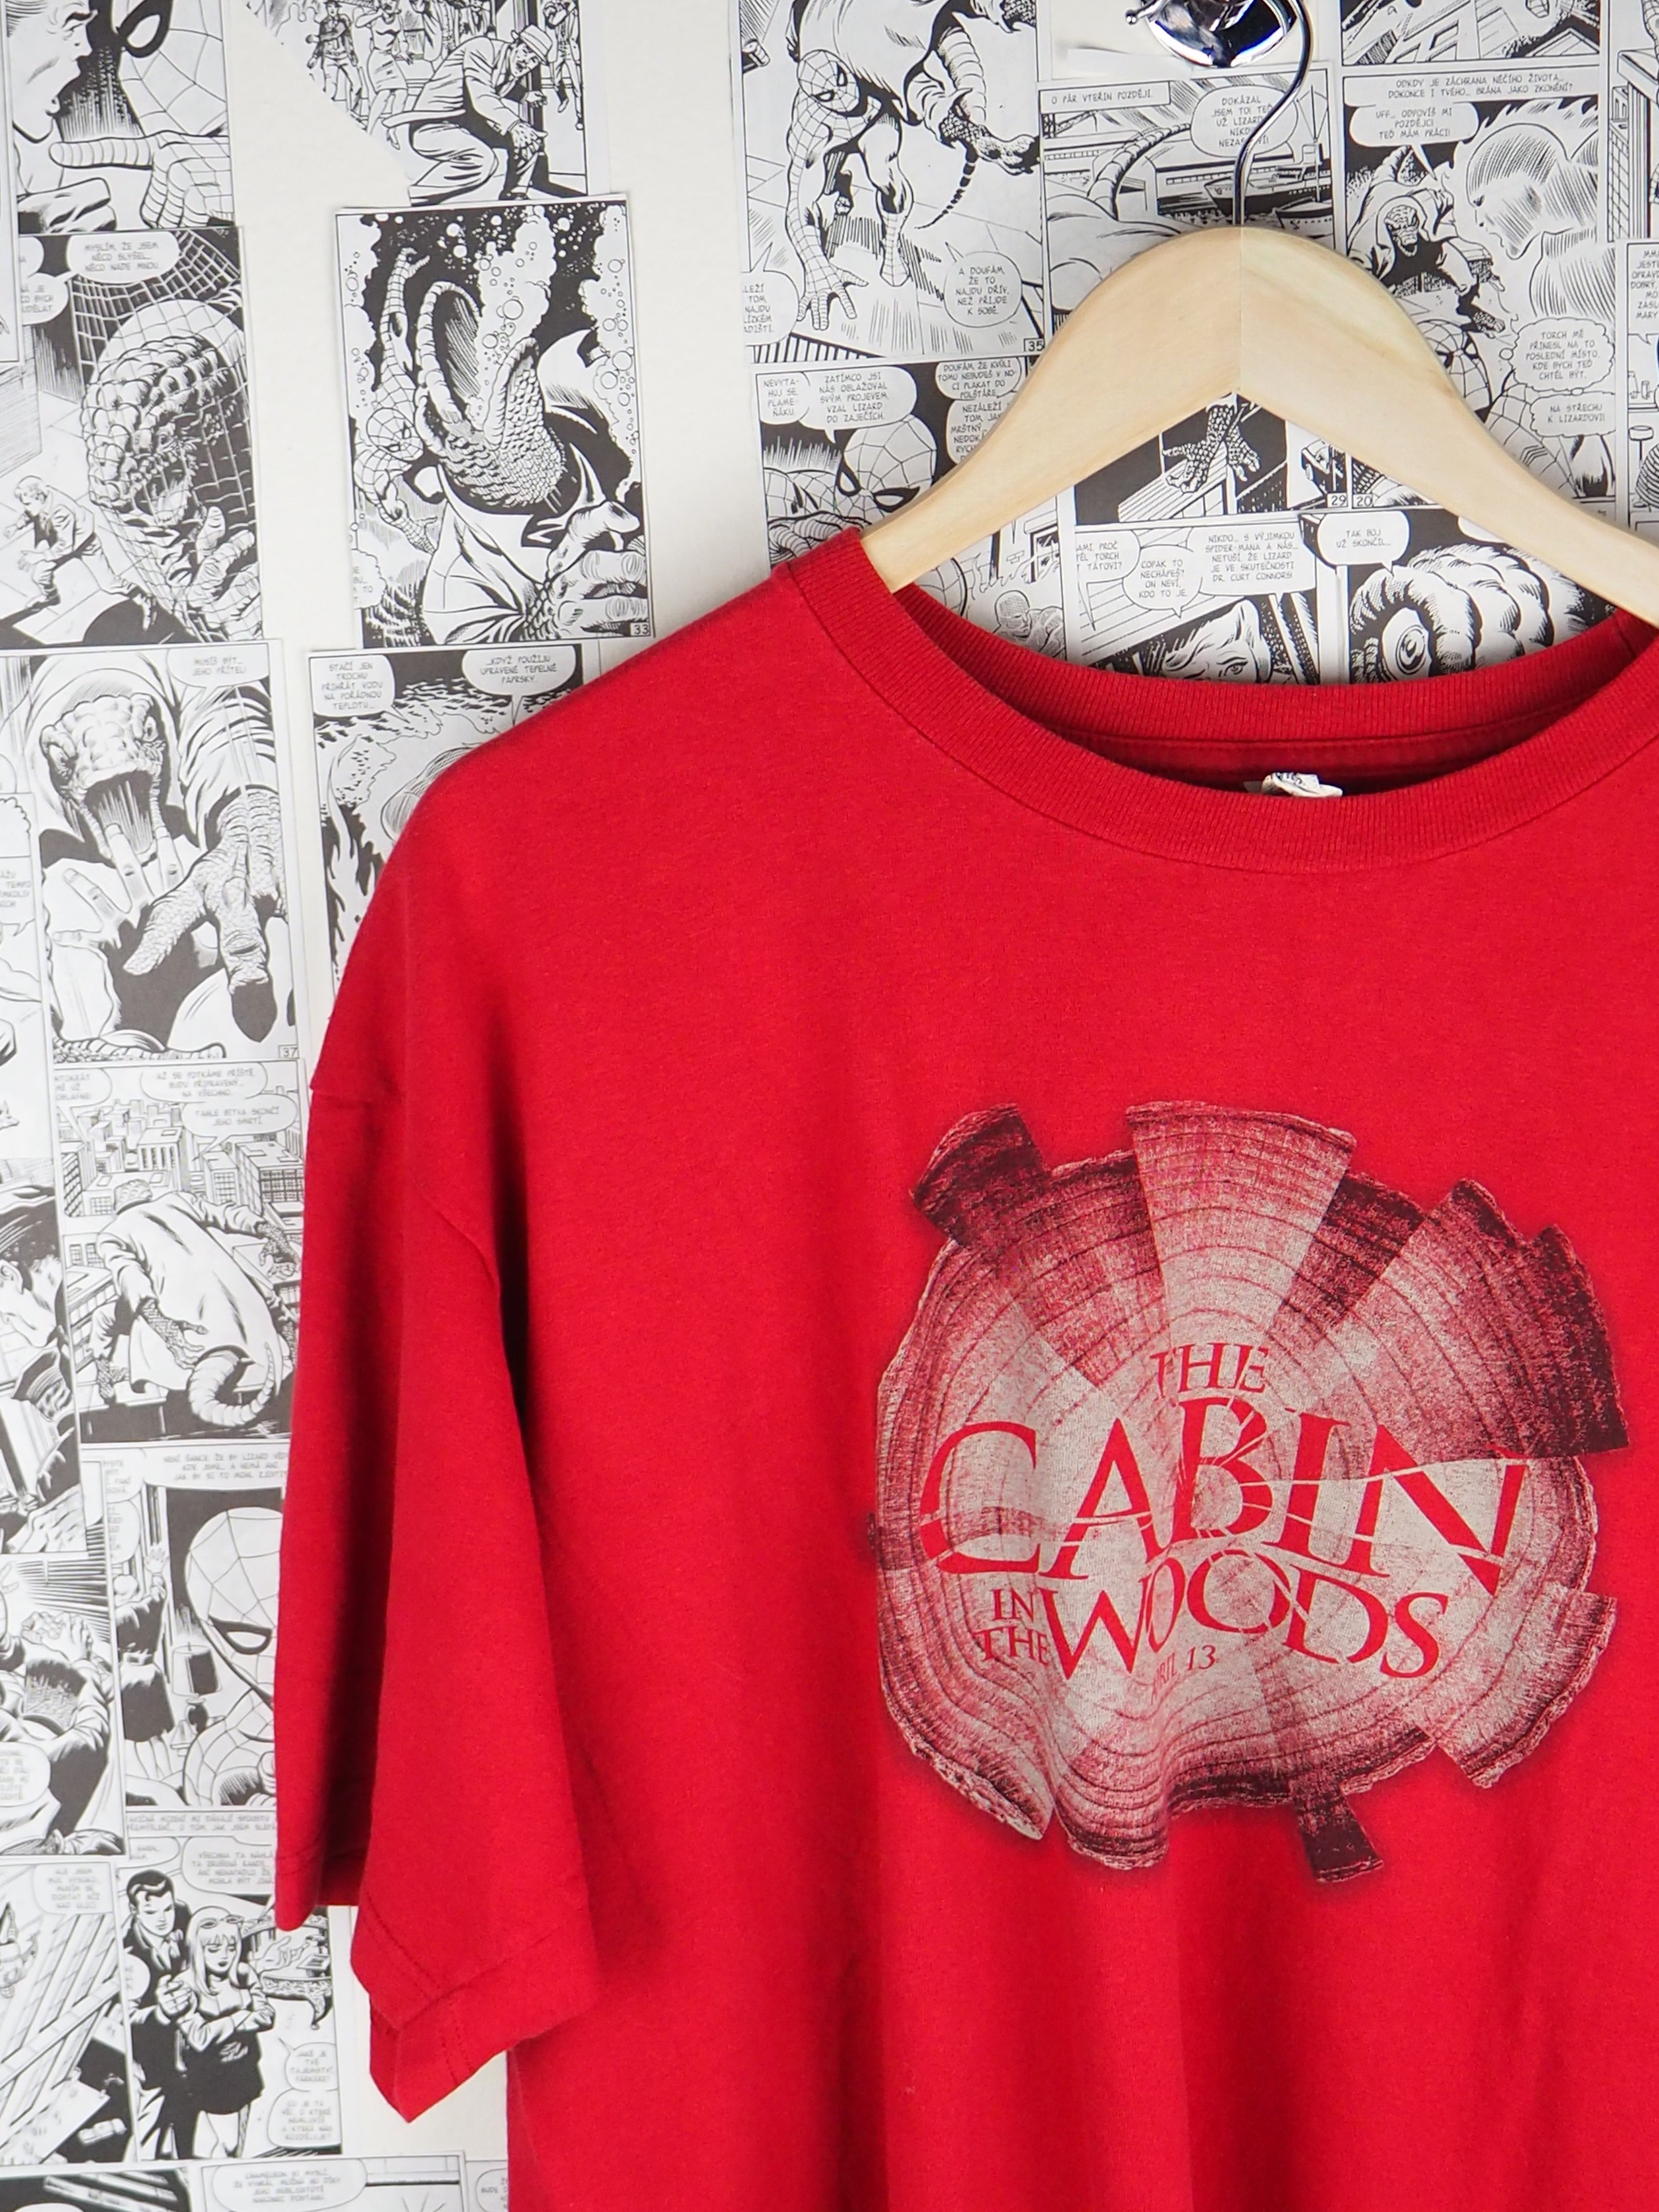 Vintage The Cabin in the Woods t-shirt - size XL